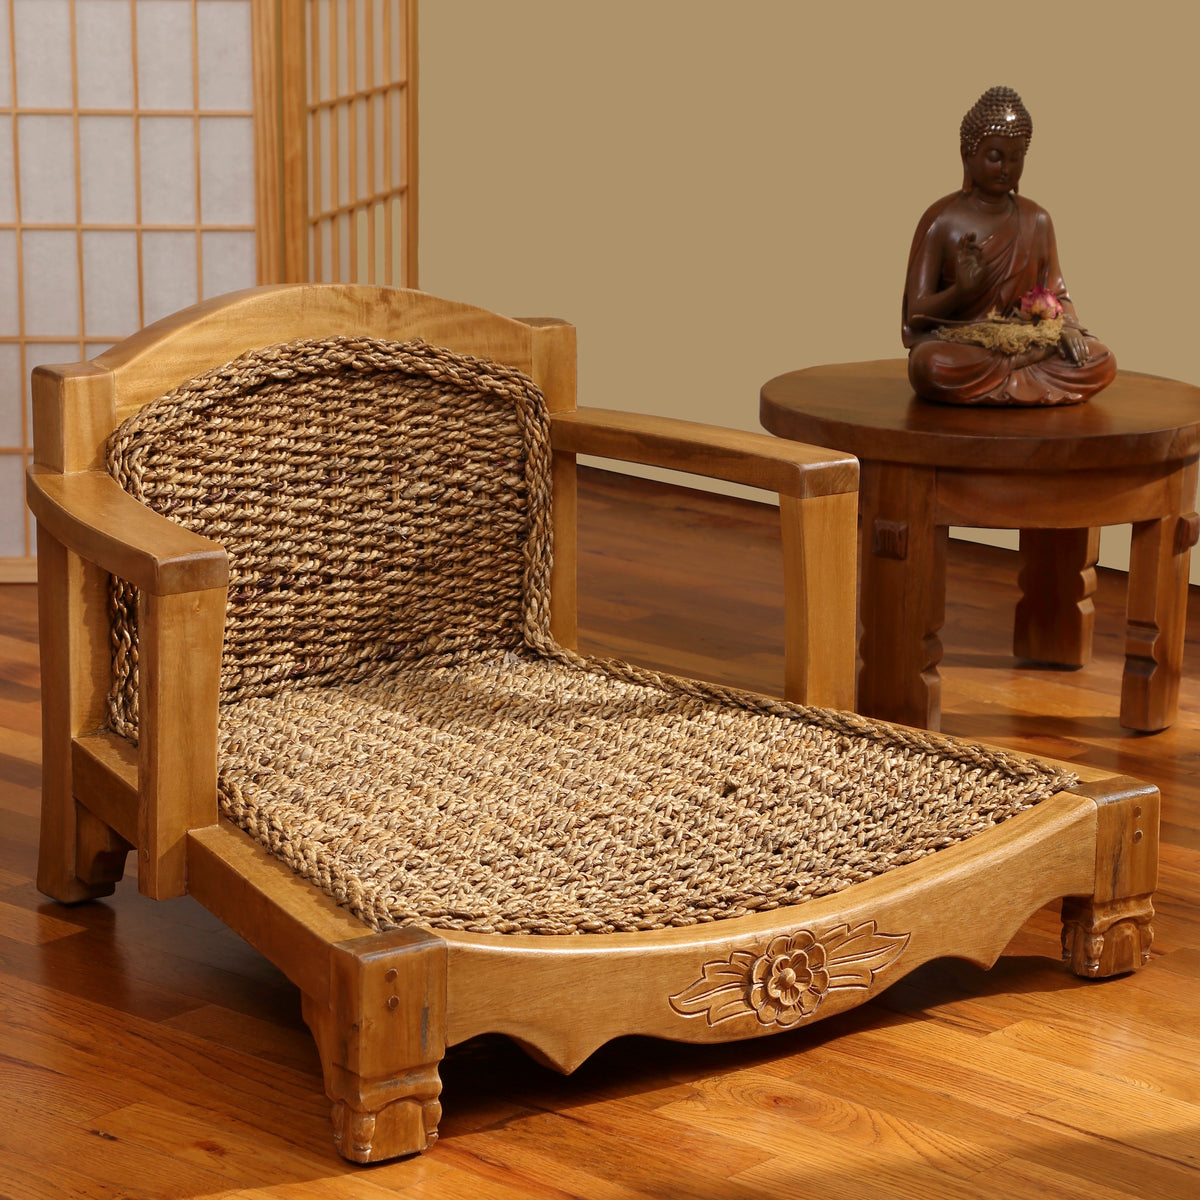 Harmony in Design Raja Meditation Chair Cream without cushion